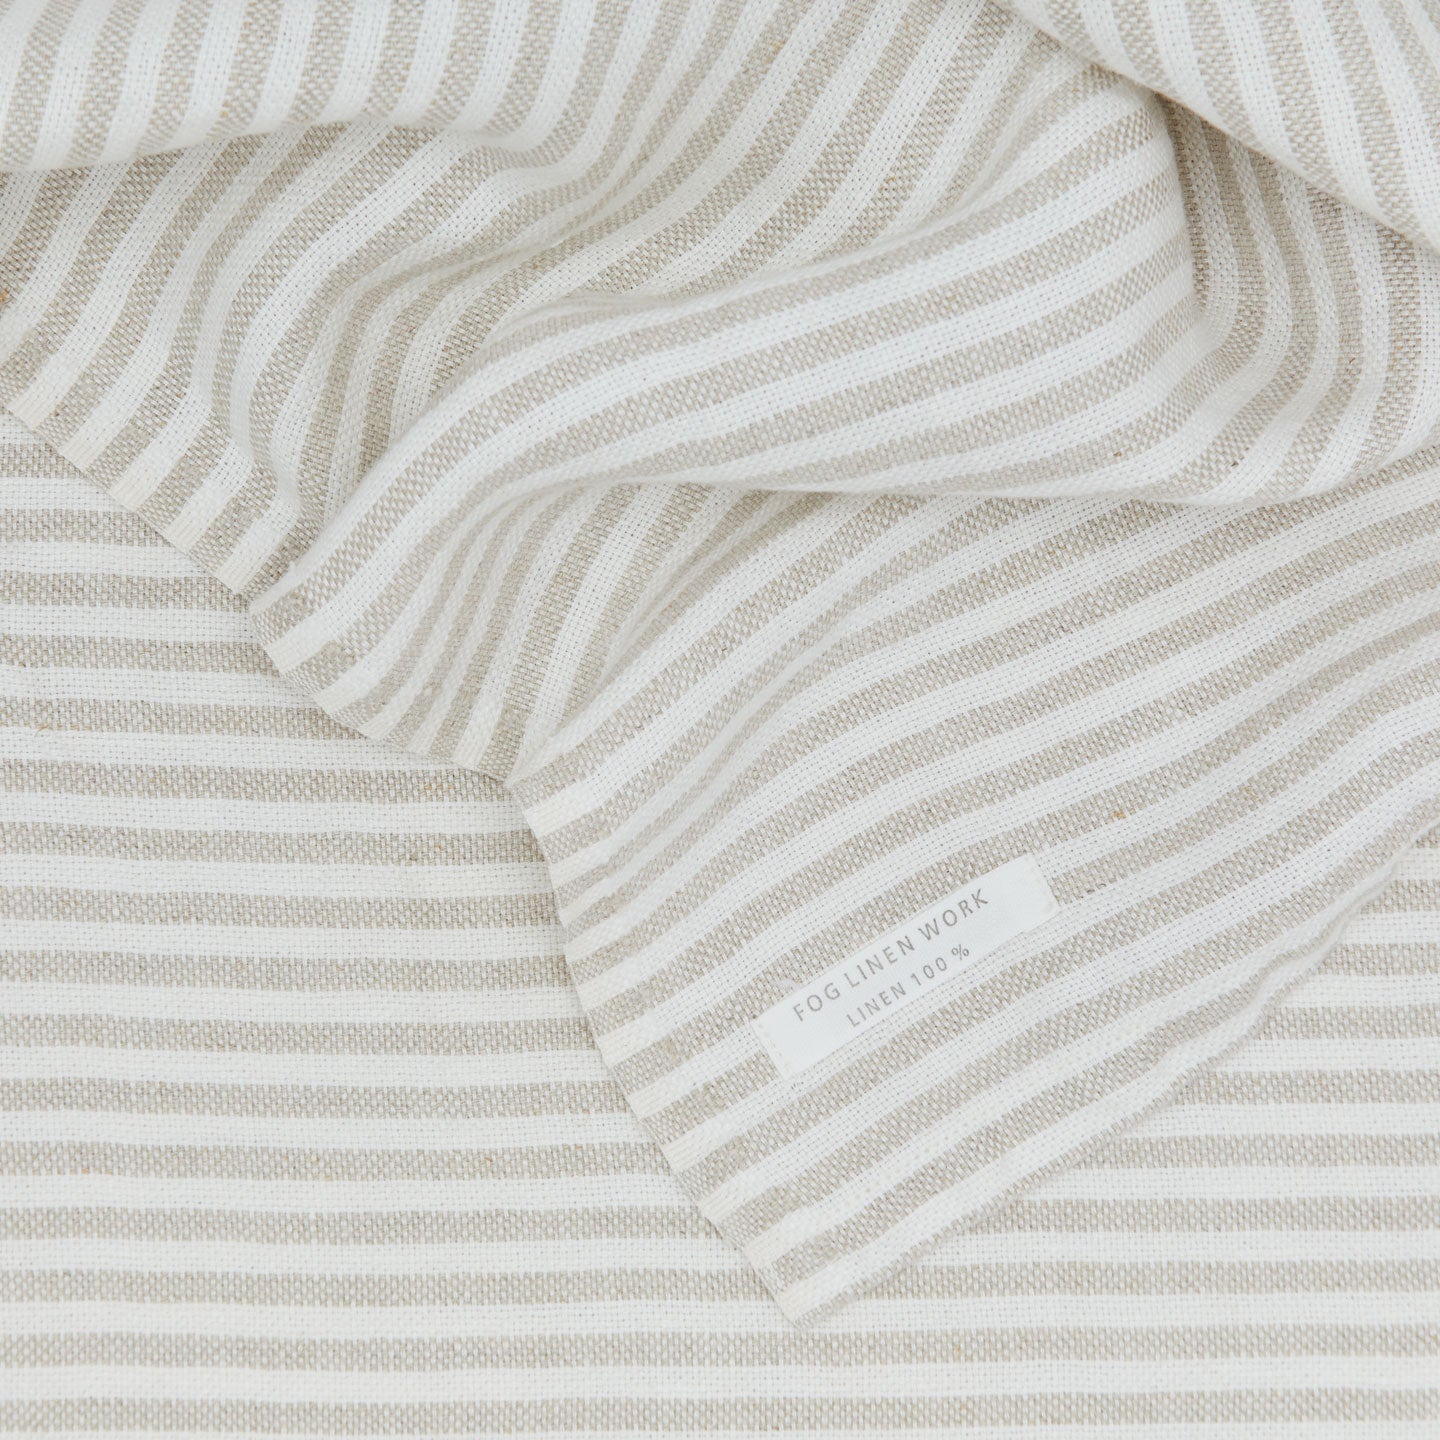 A close up of a chambray linen throw with white stripes.